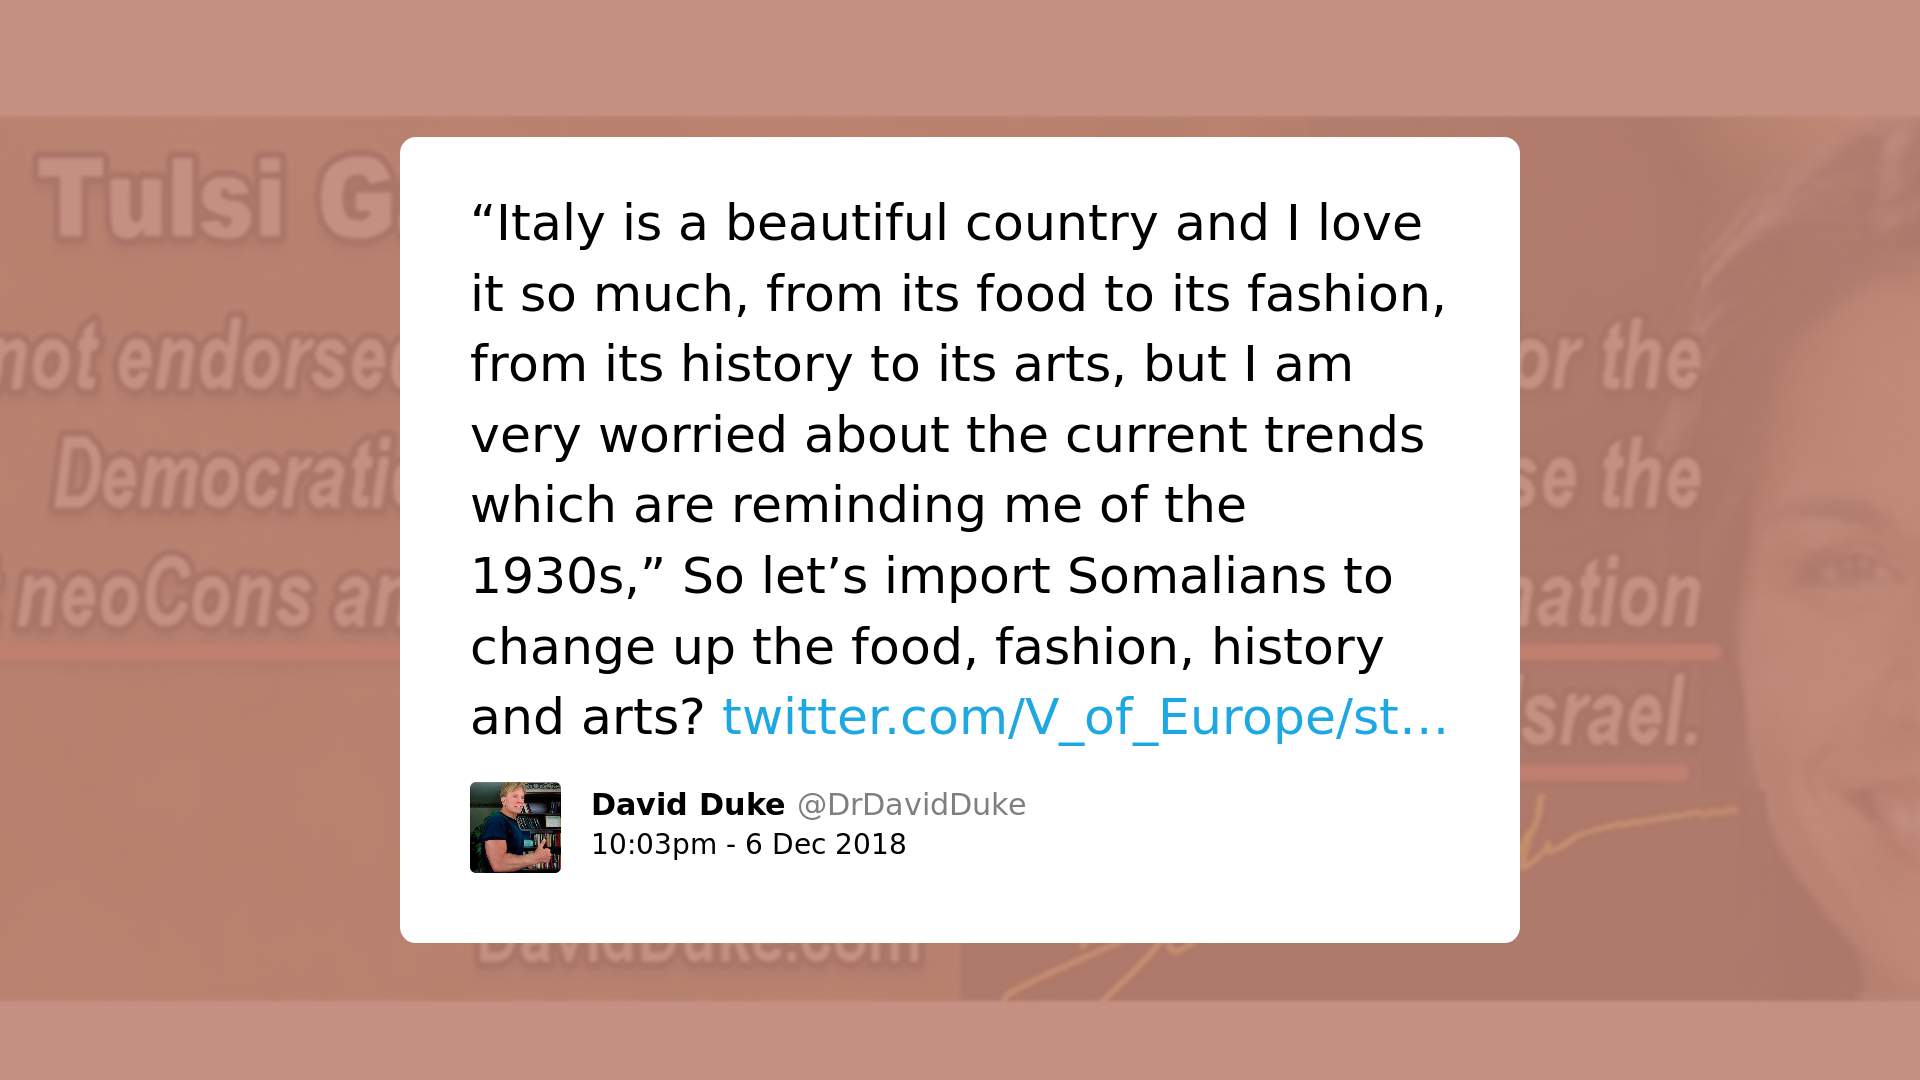 Print screen of a post by David Duke with the text: "Italy is a beautiful country and I love it so much, from its food to its fashion, from its history to its arts, but I am very worried about the current trends which are reminding me of the 1930s," So let's import Somalians to change up the food, fashion, history and arts?